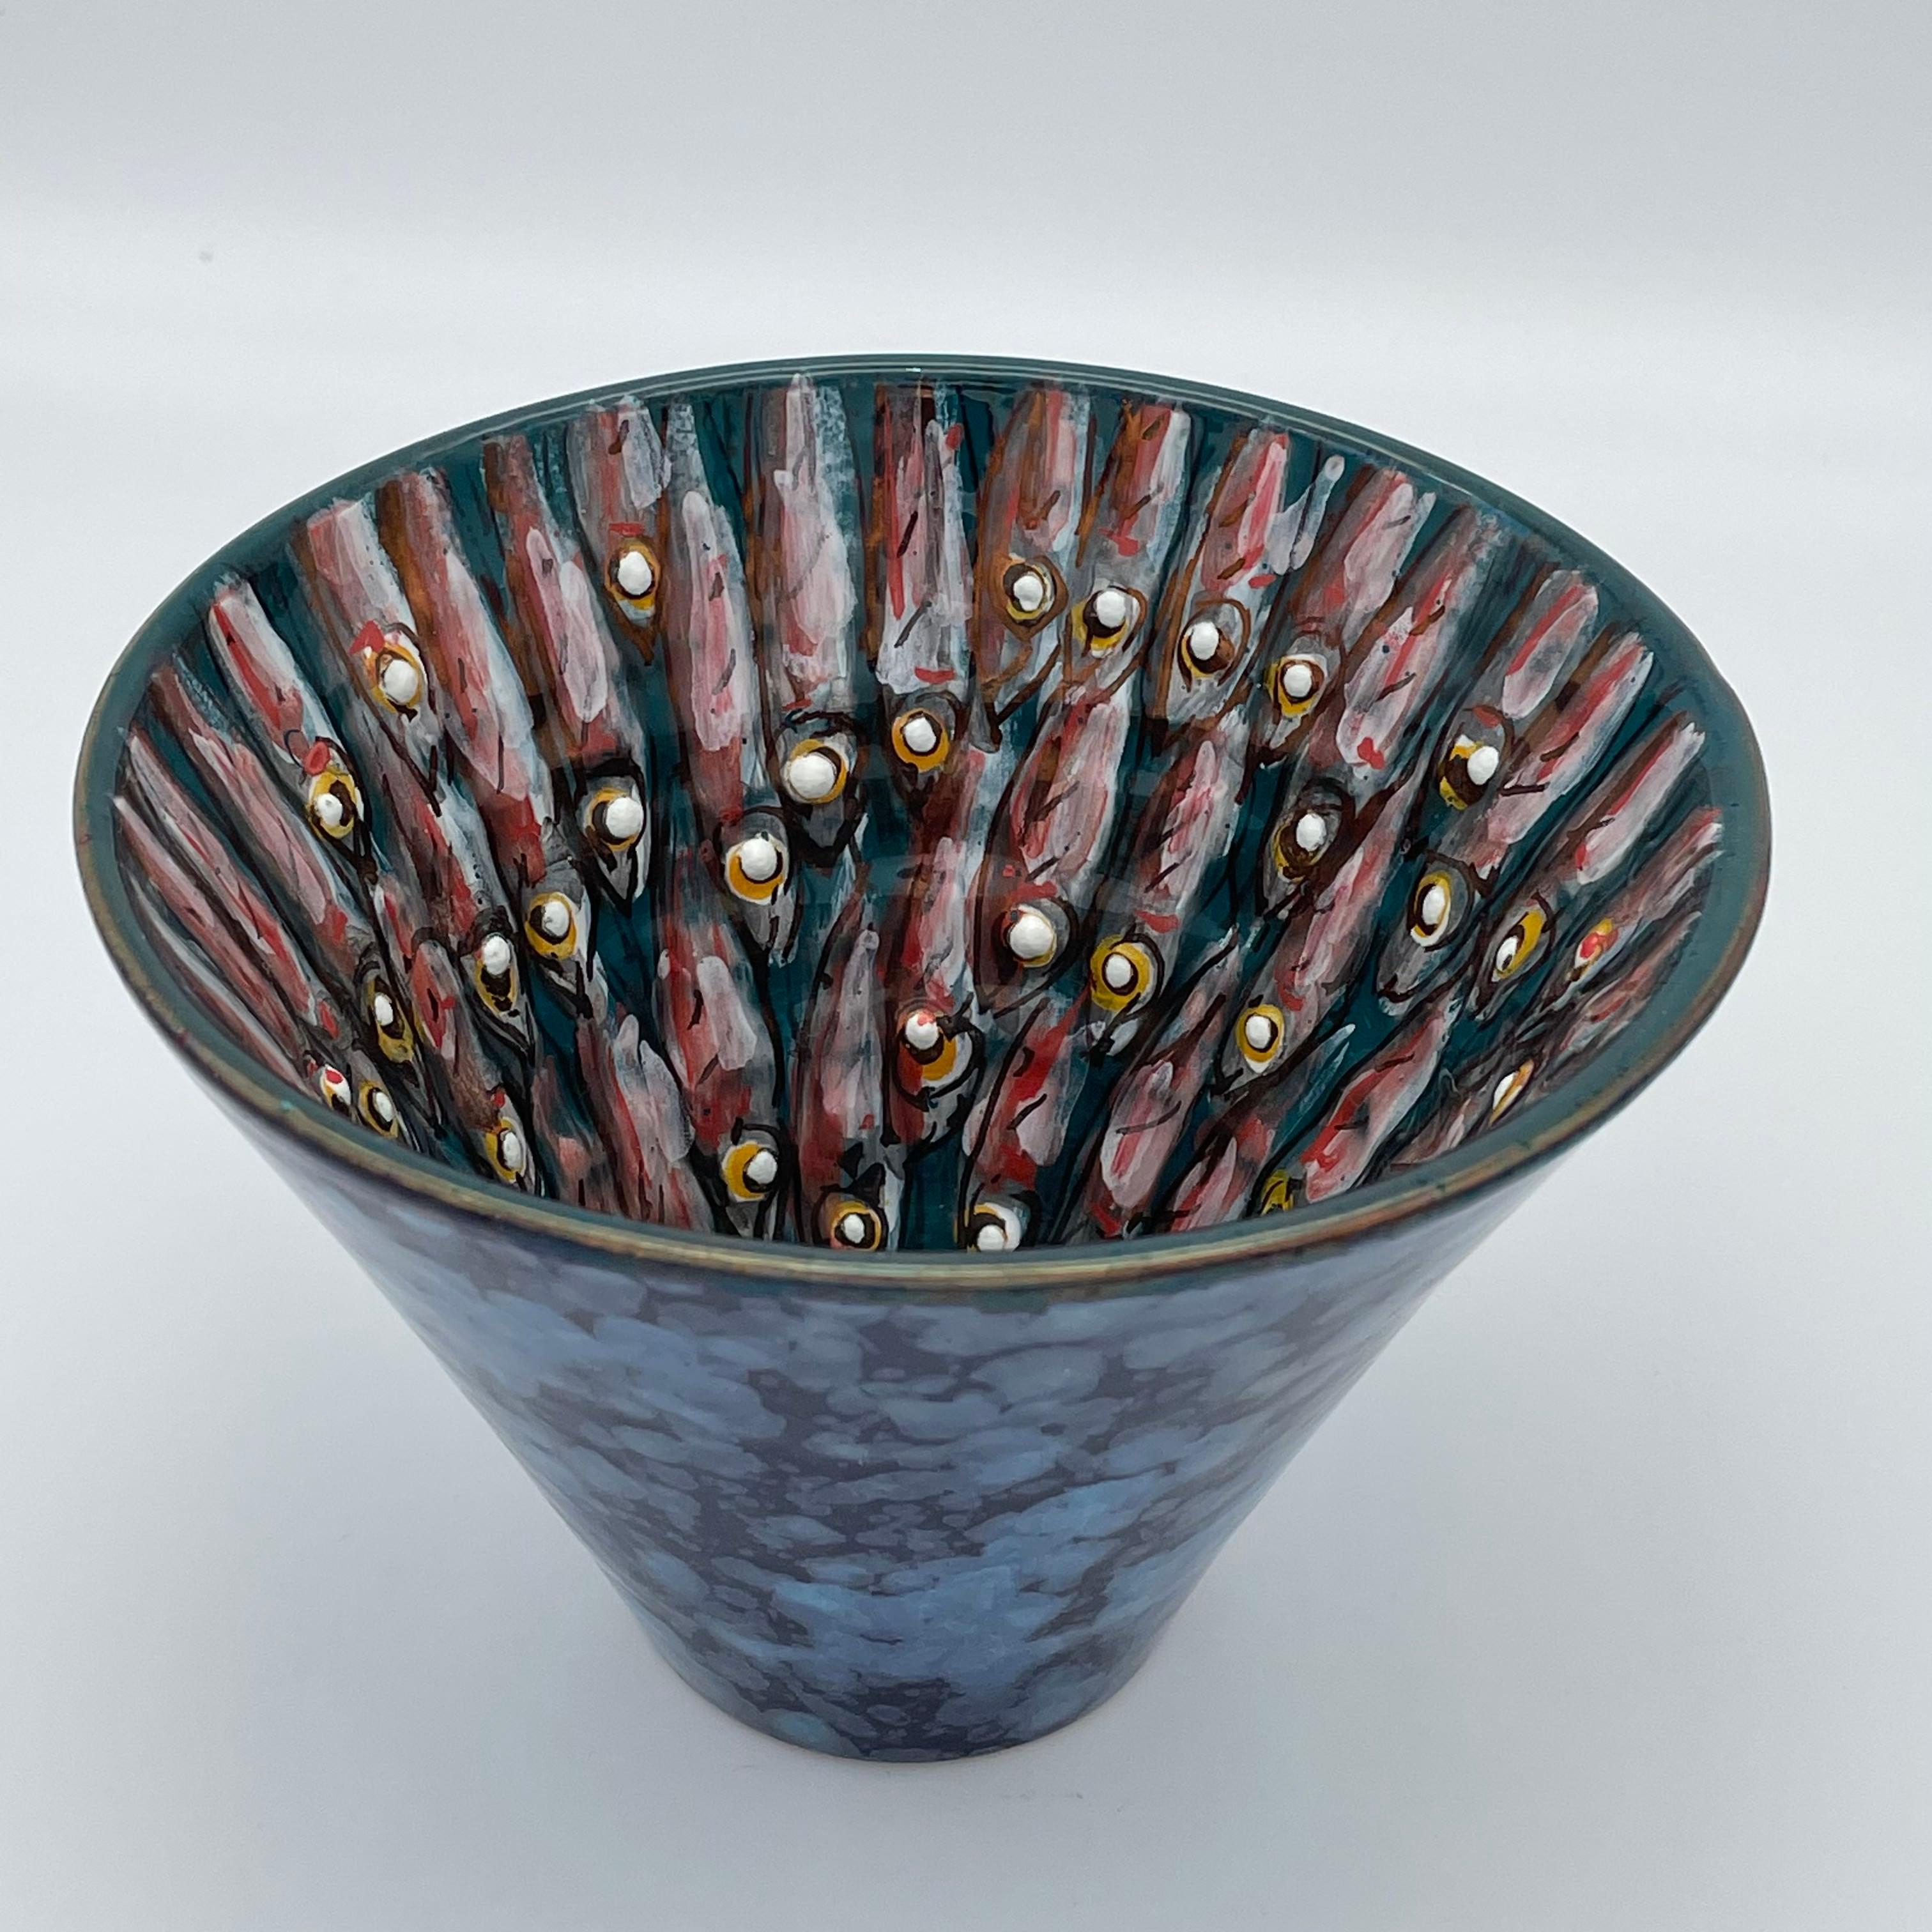 Small conical jar, 2021, full-fire reduction faience earthenware 15 cm diameter x 10 cm height , hand painted unique piece.


Bottega Vignoli is a brand of artistic ceramics based in Faenza, one of the most representative ceramic production